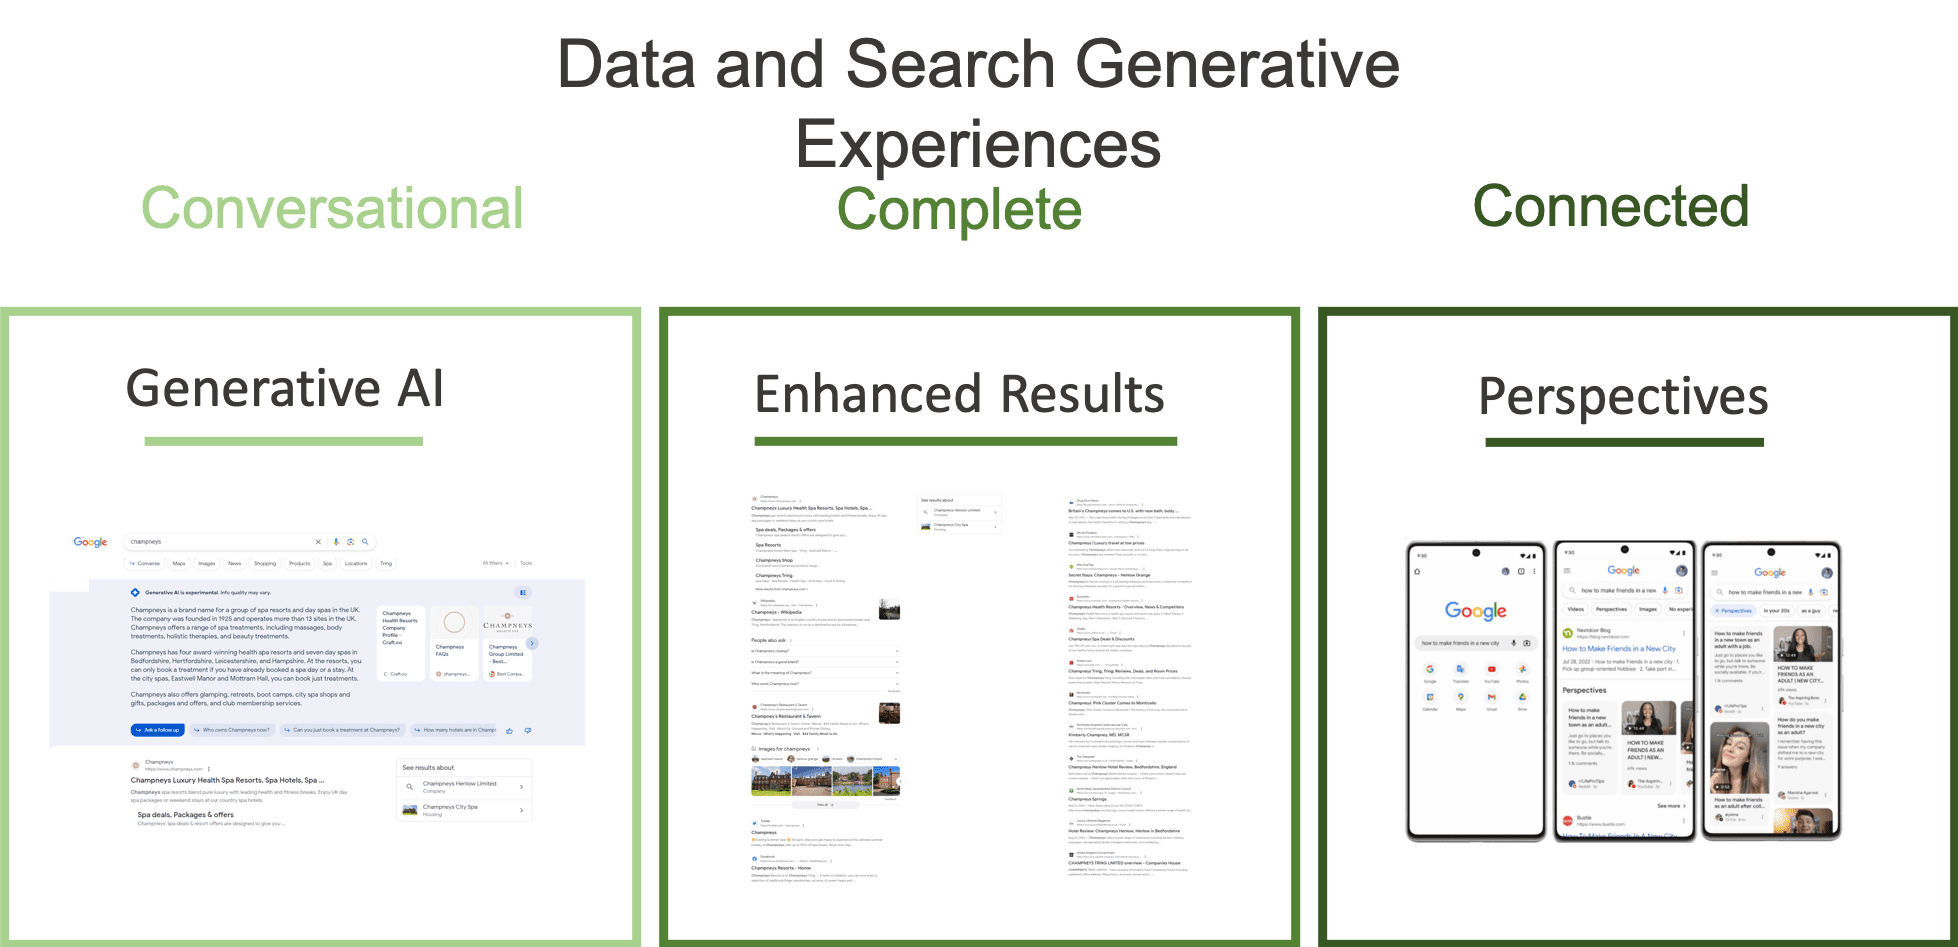 Data and Search Generative Experiences